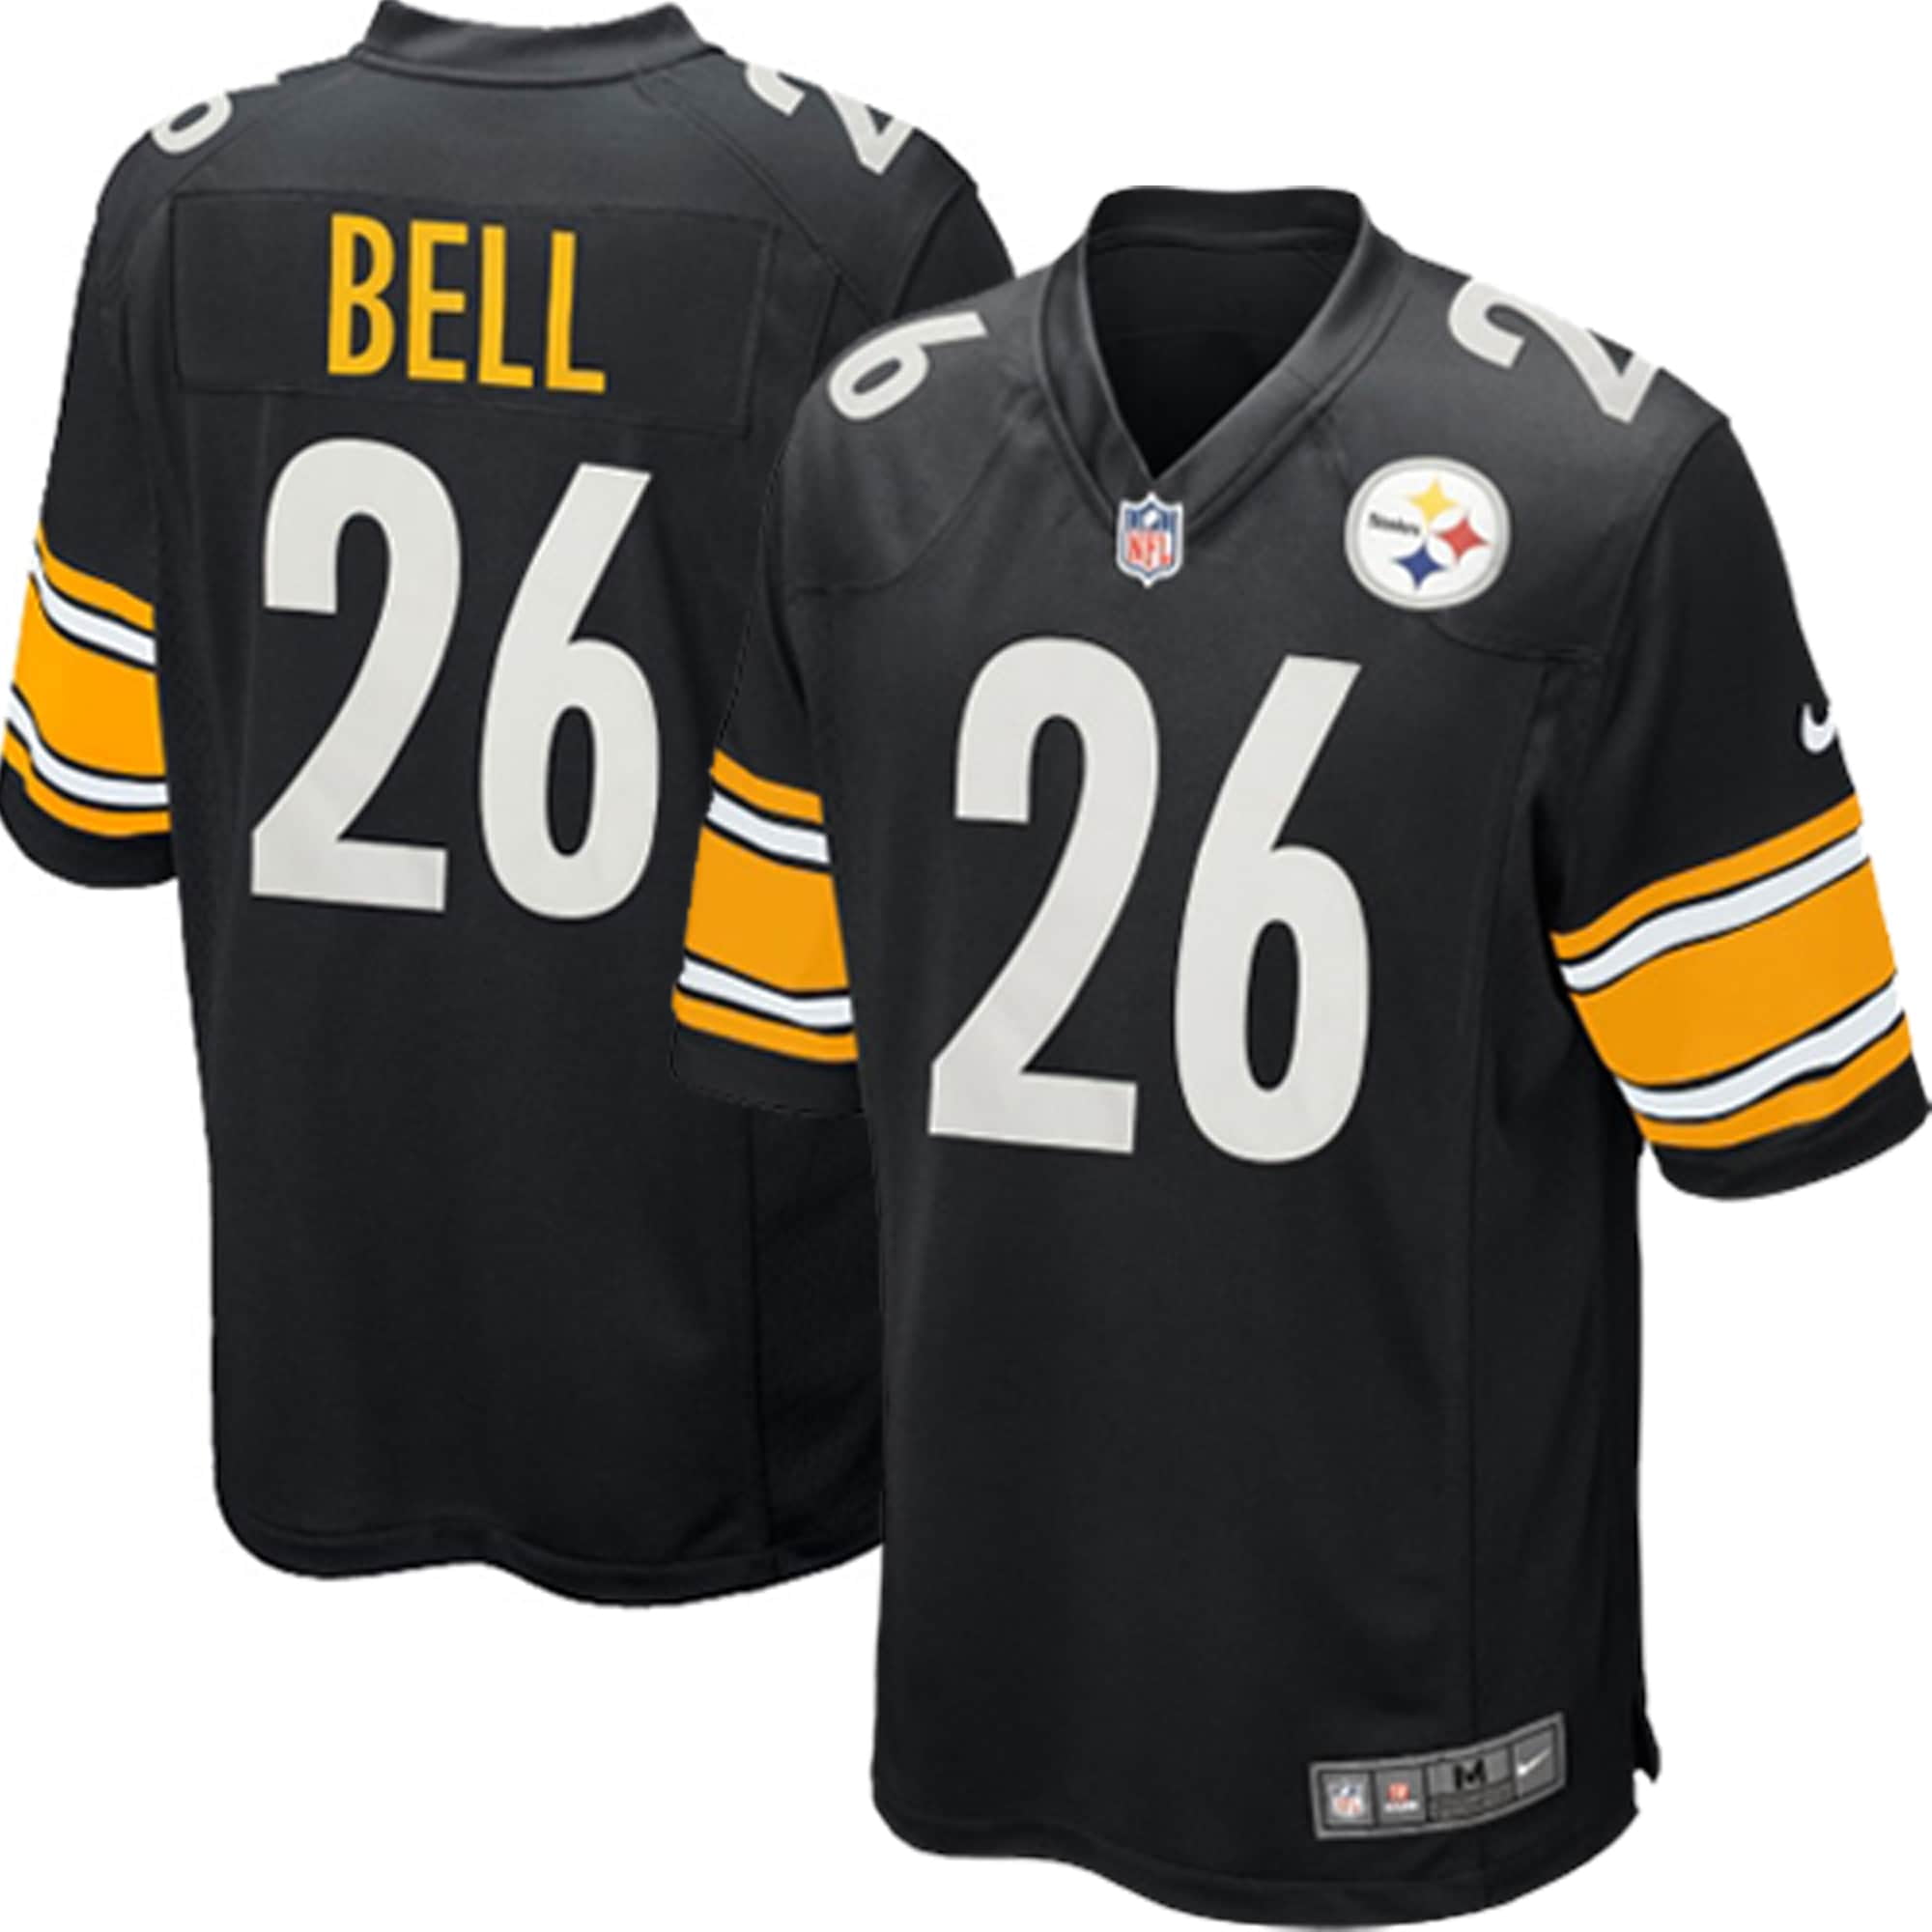 Le'Veon Bell Pittsburgh Steelers Nike Youth Team Color Game Jersey - Black - Walmart.com